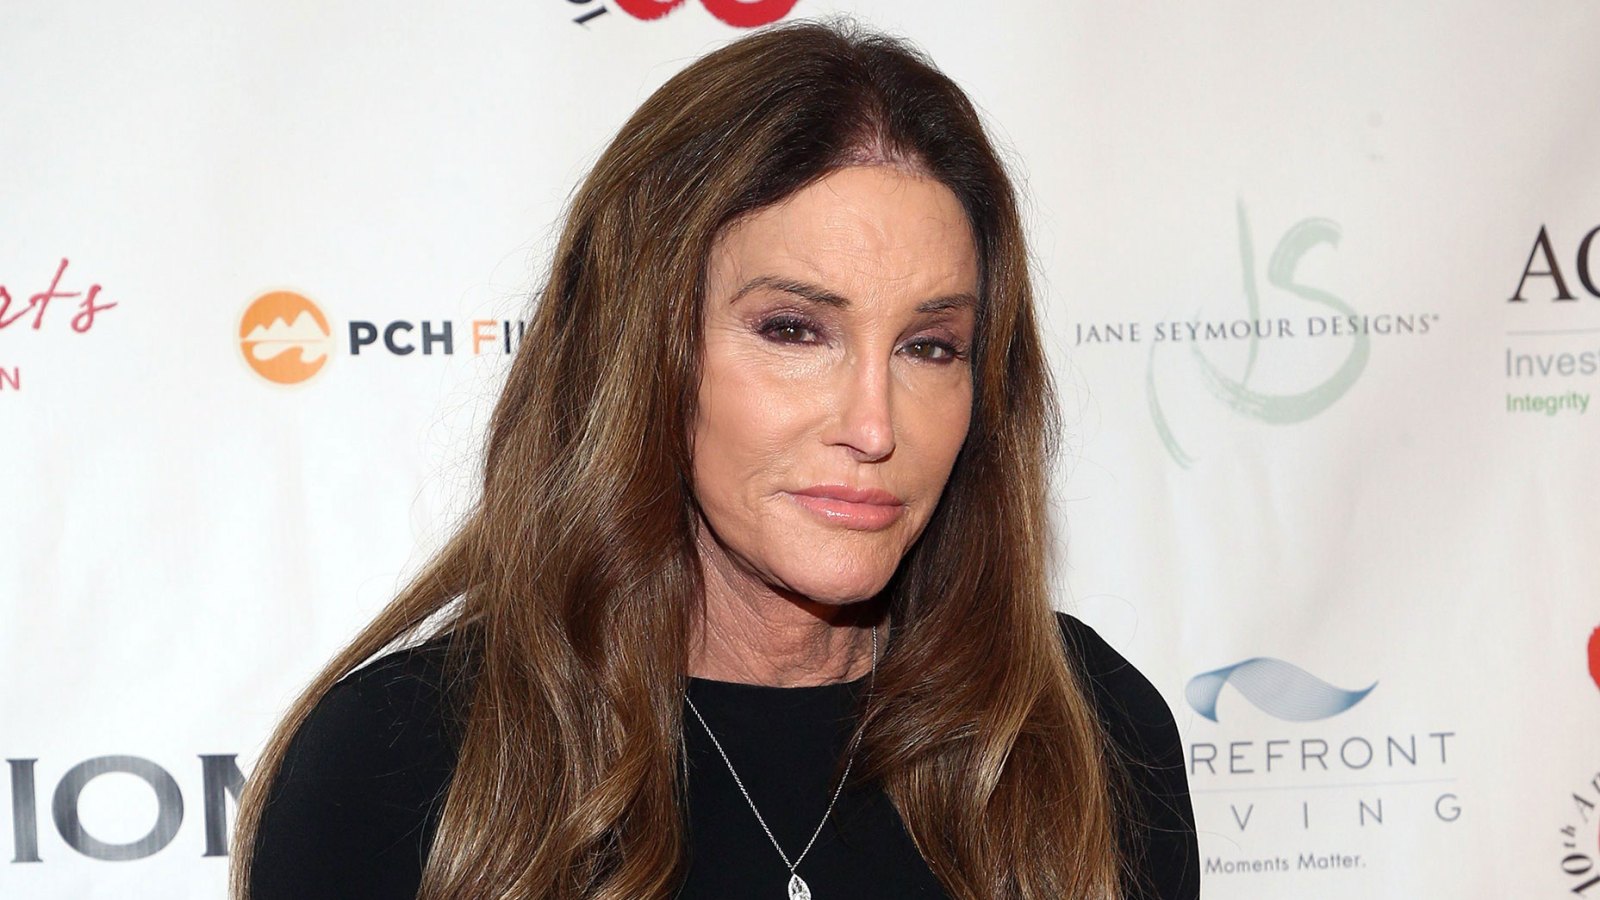 Caitlyn Jenner Opens Up About Not Appearing on Hulus The Kardashians